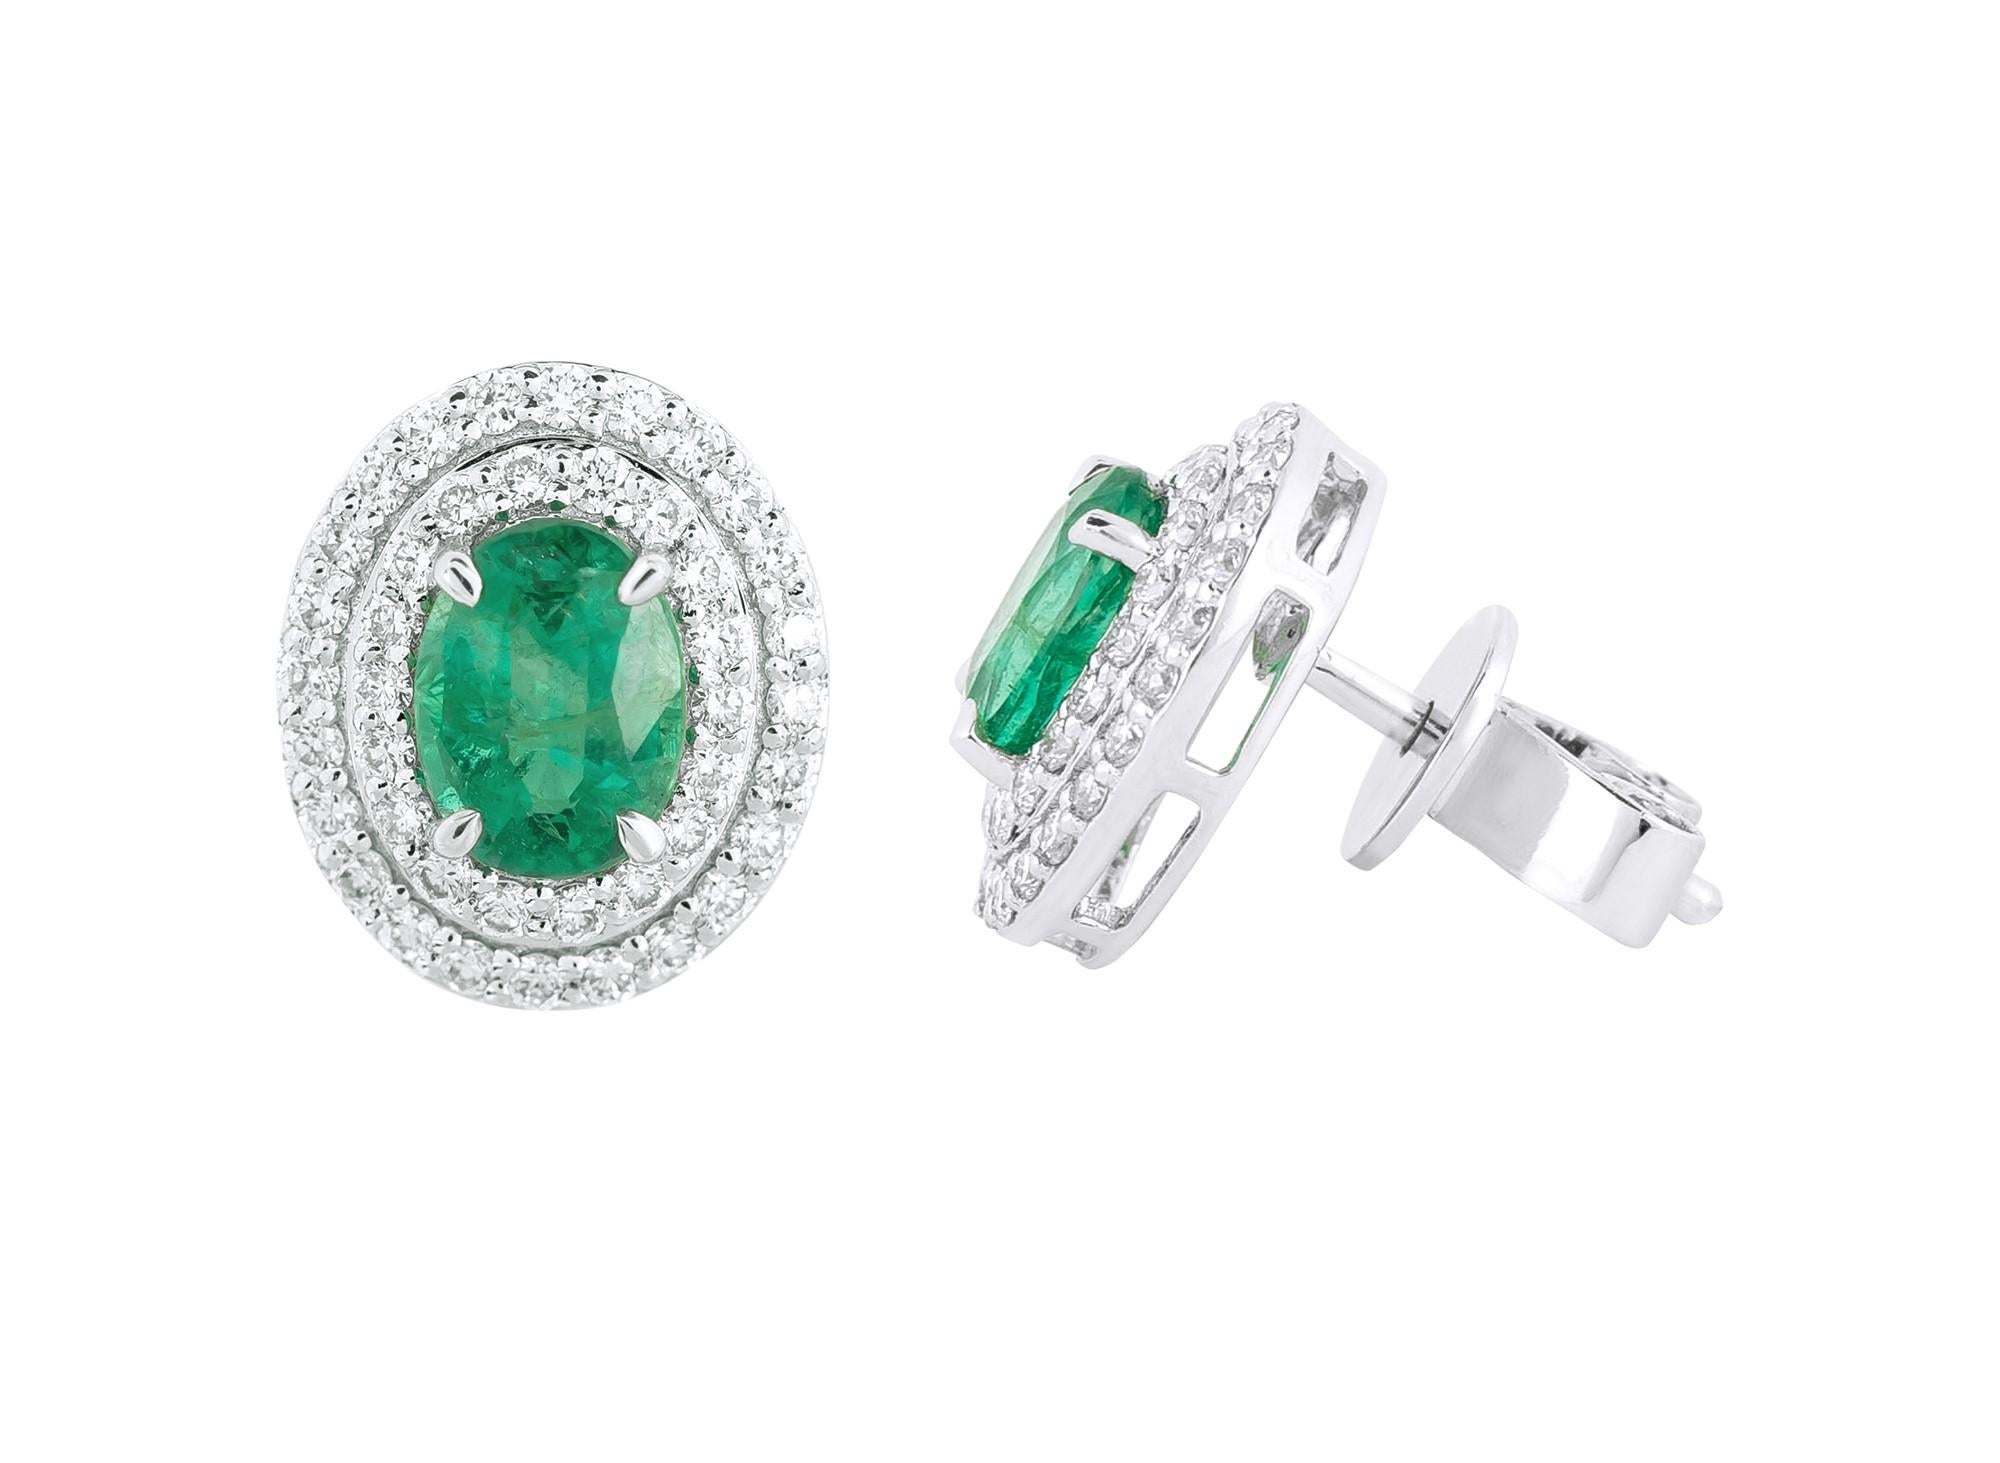 Unveil the grace and elegance of our 18 Karat Gold 2.04 Carat Diamond and Emerald Solitaire Stud Earrings. Crafted with precision and carefully curated, each pair represents a harmonious blend of traditional craftsmanship and contemporary